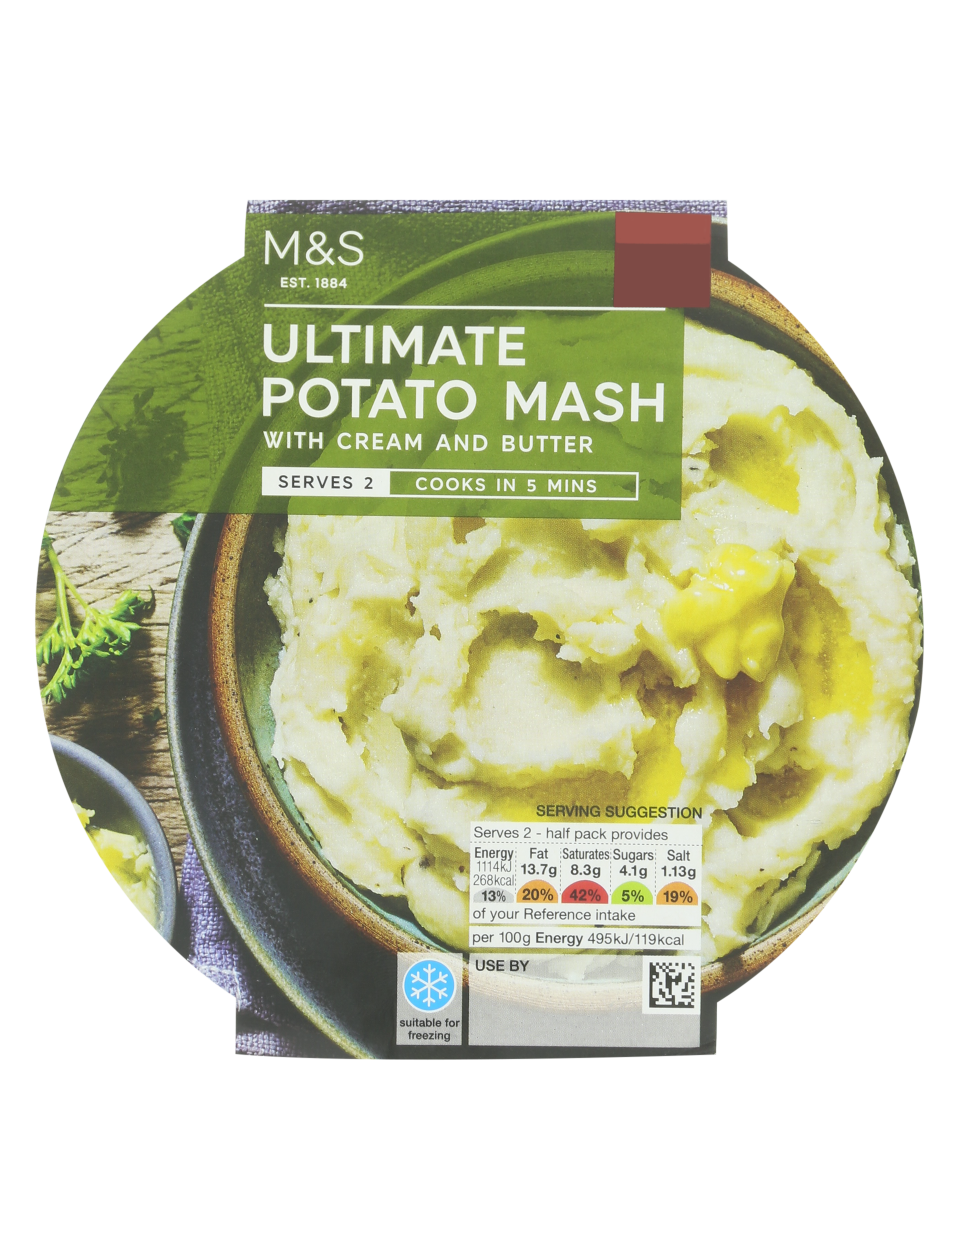 Marks and Spencer's Ultimate potato mash